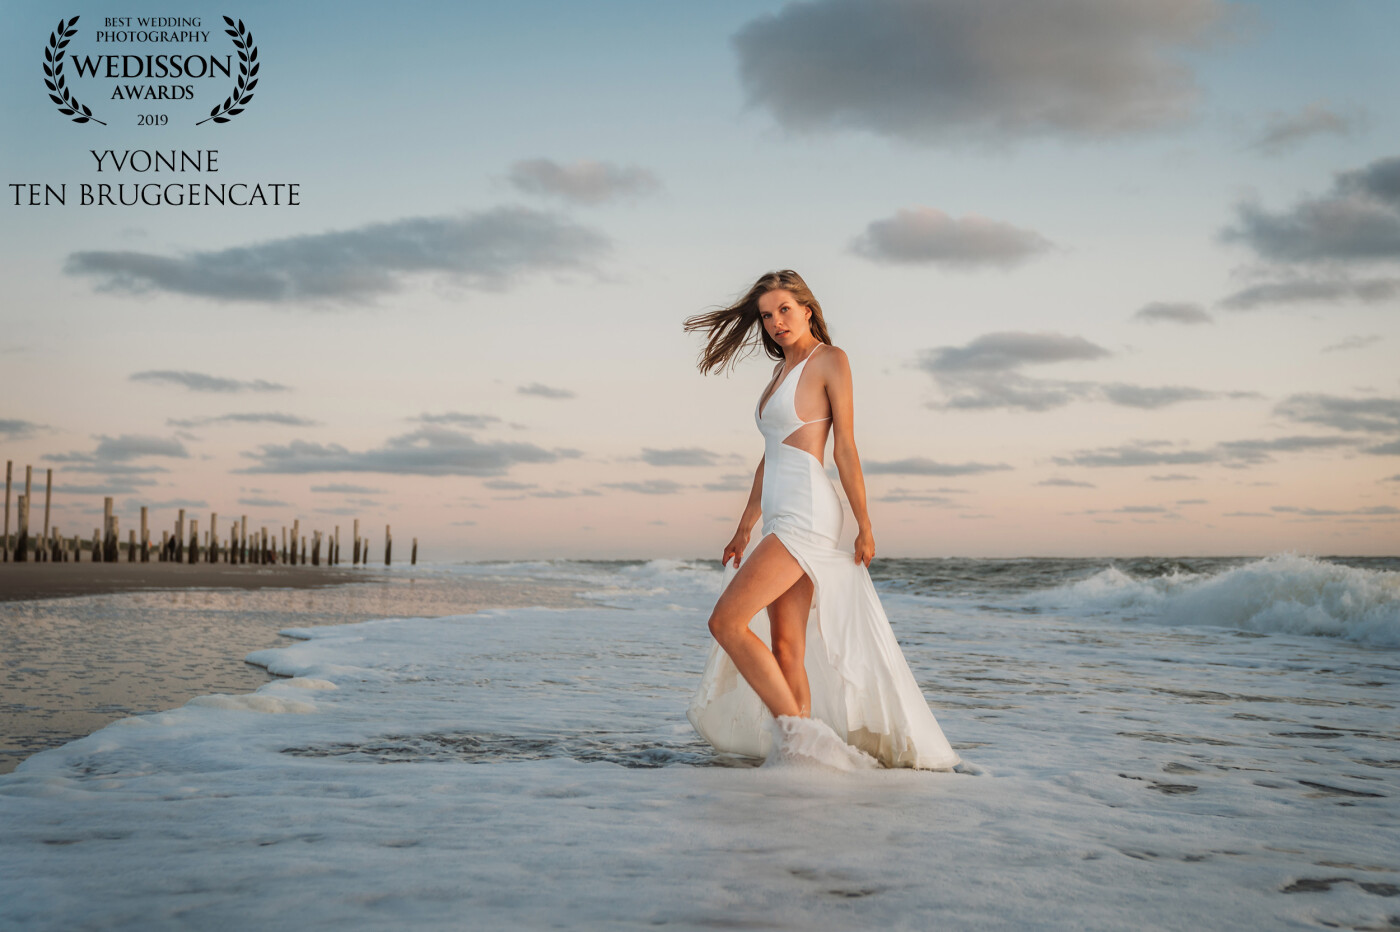 This afterweddingshoot was in Petten where you can the beautiful background. This lady was so cool and having so much fun in front of my camera